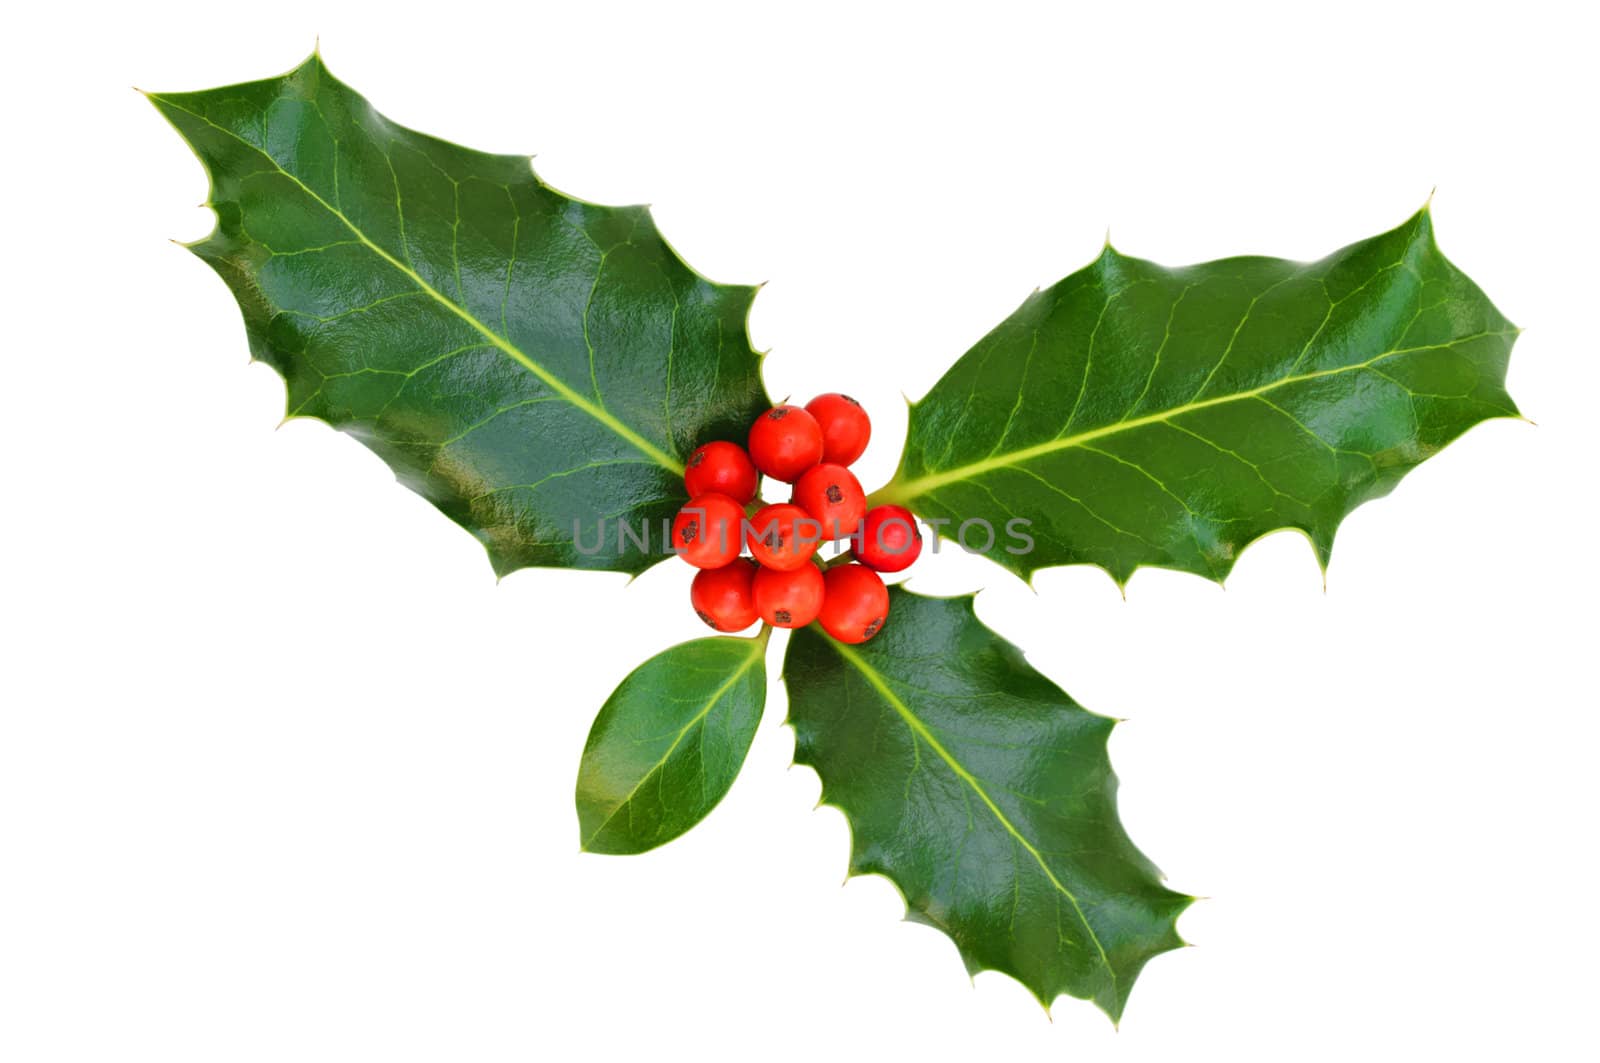 Holly leaves with berries on a white background, isolated. by lobzik